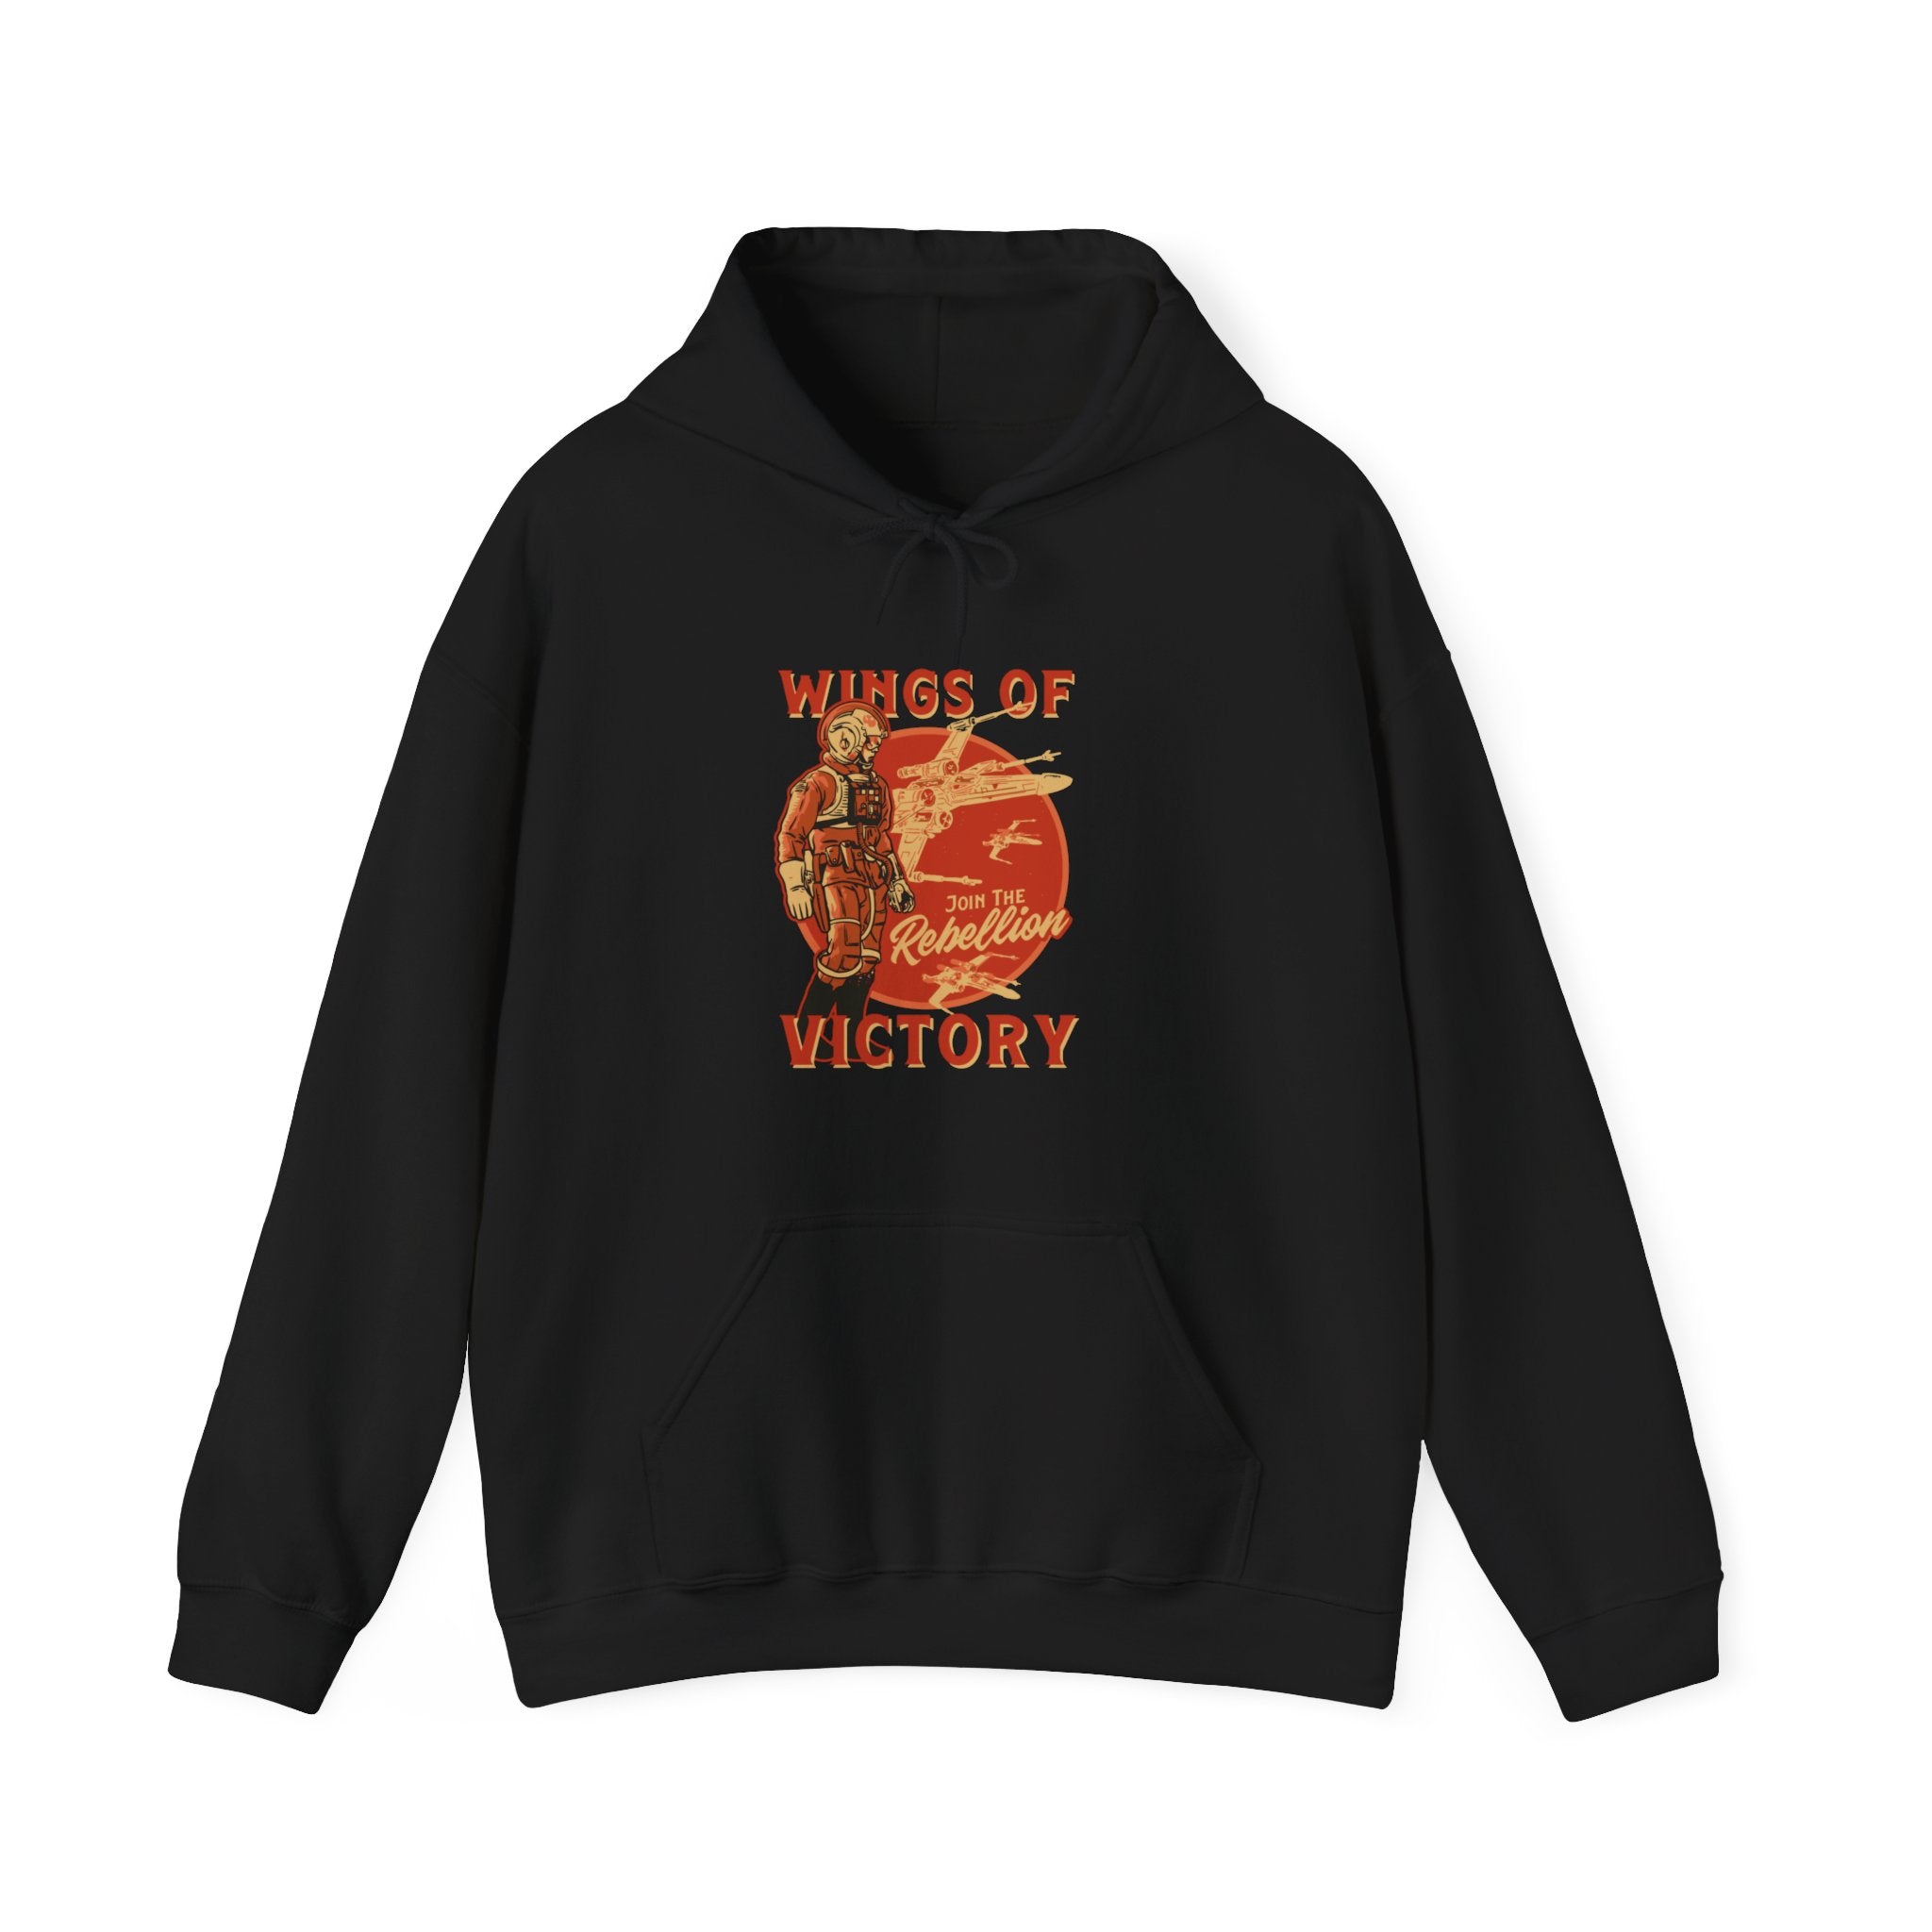 Wings of Victory - Hooded Sweatshirt with a graphic depicting a soldier and aircraft, accompanied by the text "Wings of Victory.